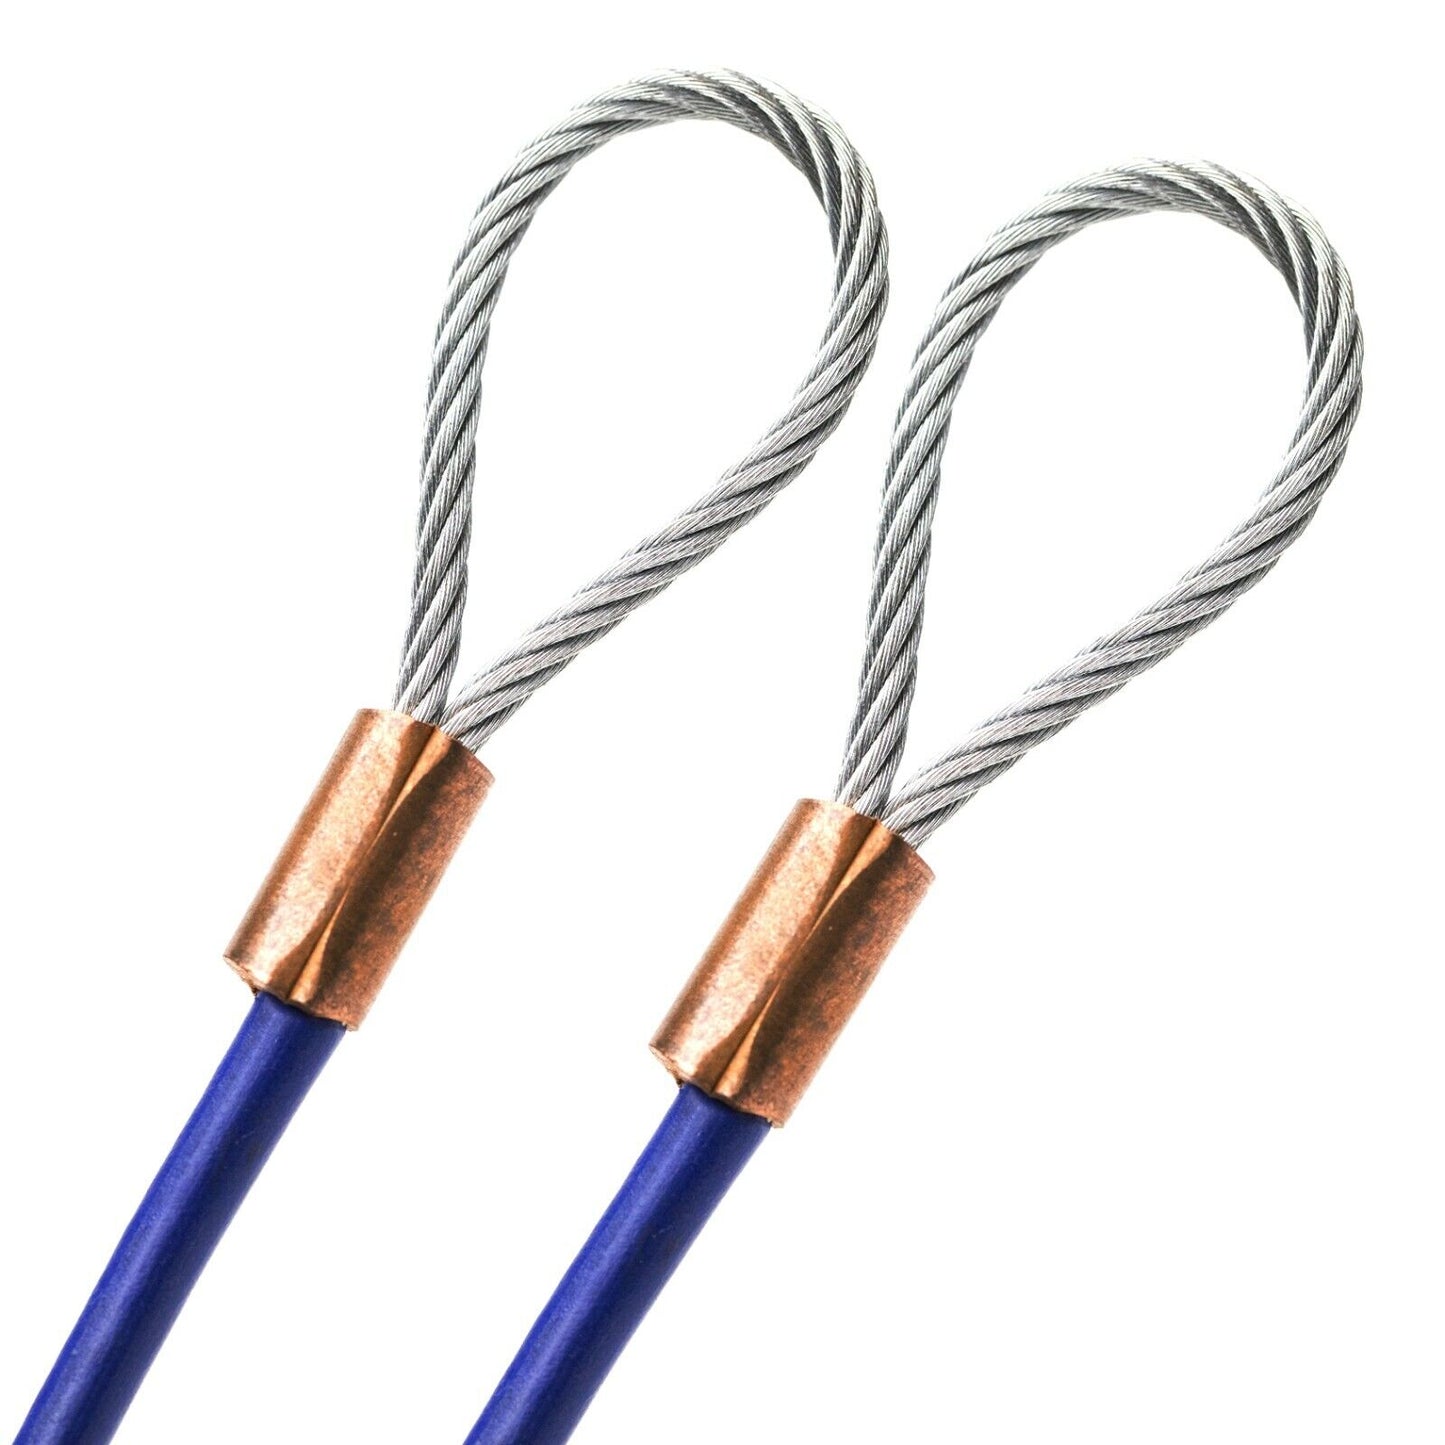 1-100ft Cut To Size 1/4 Galvanized Steel Cable BLUE Vinyl Coated To 3/16 With Copper Sleeves MADE IN USA